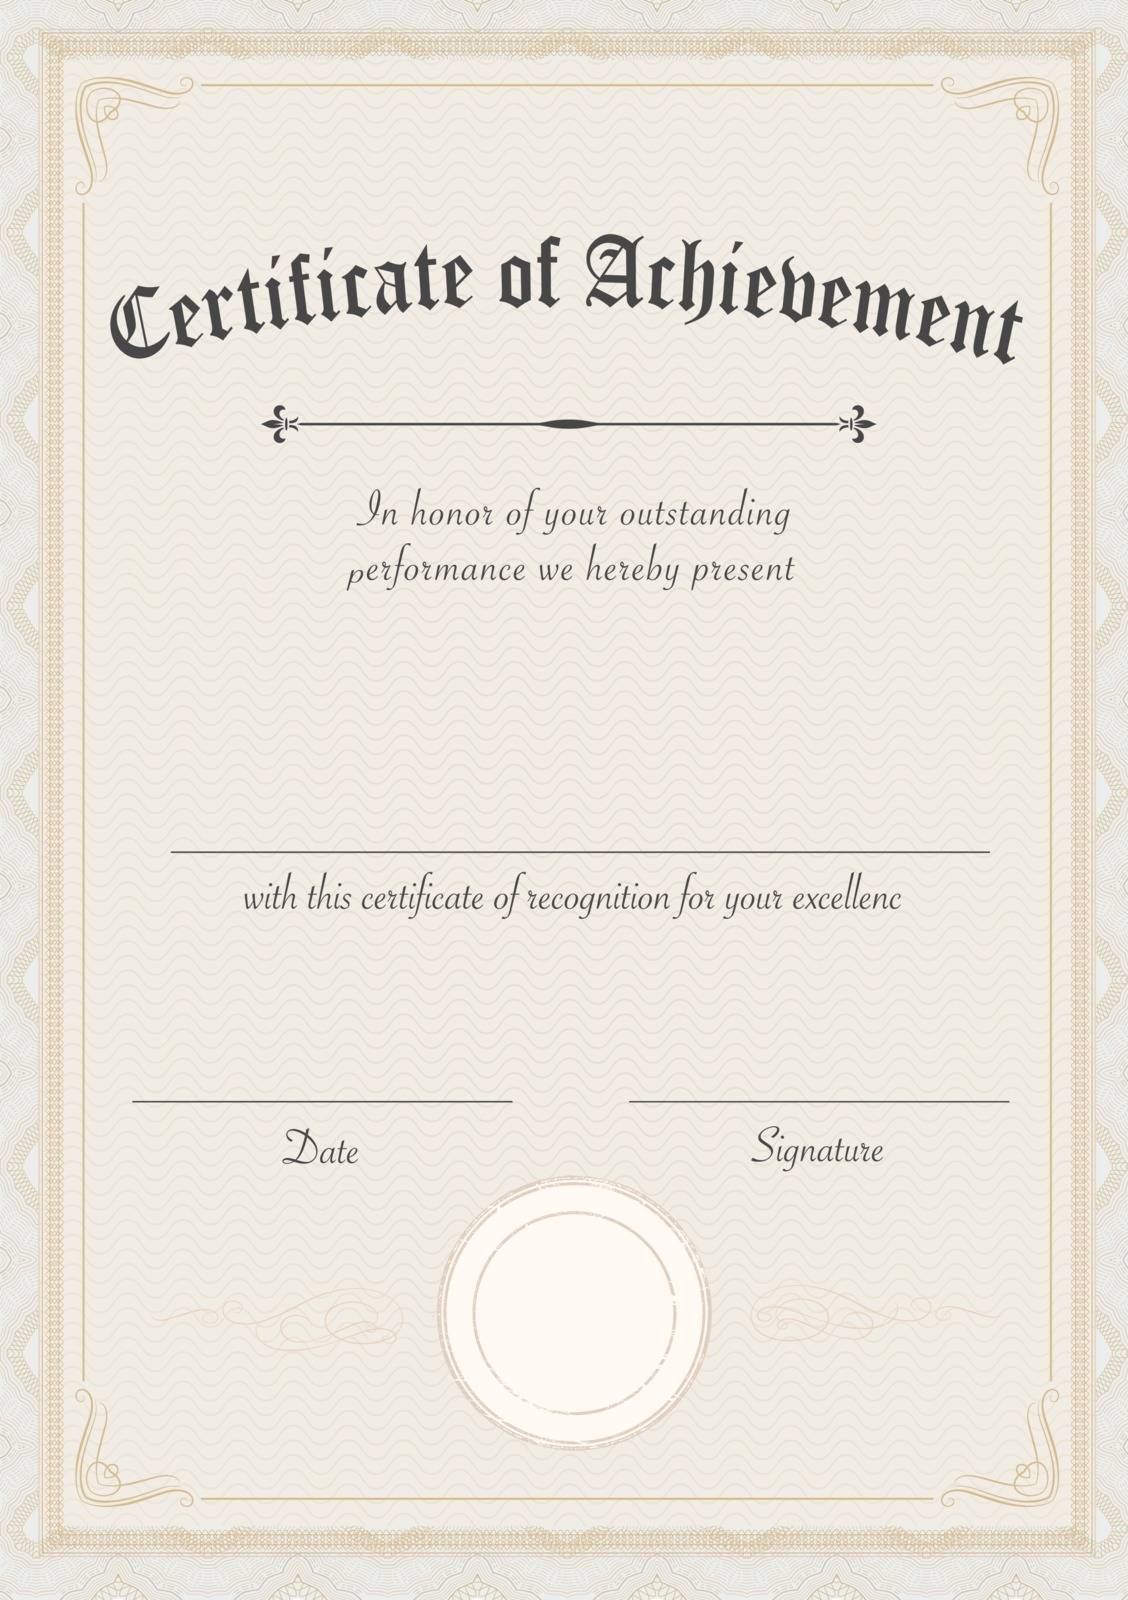  Vertical classic retro certificate of achievement paper template, it’s ready to use